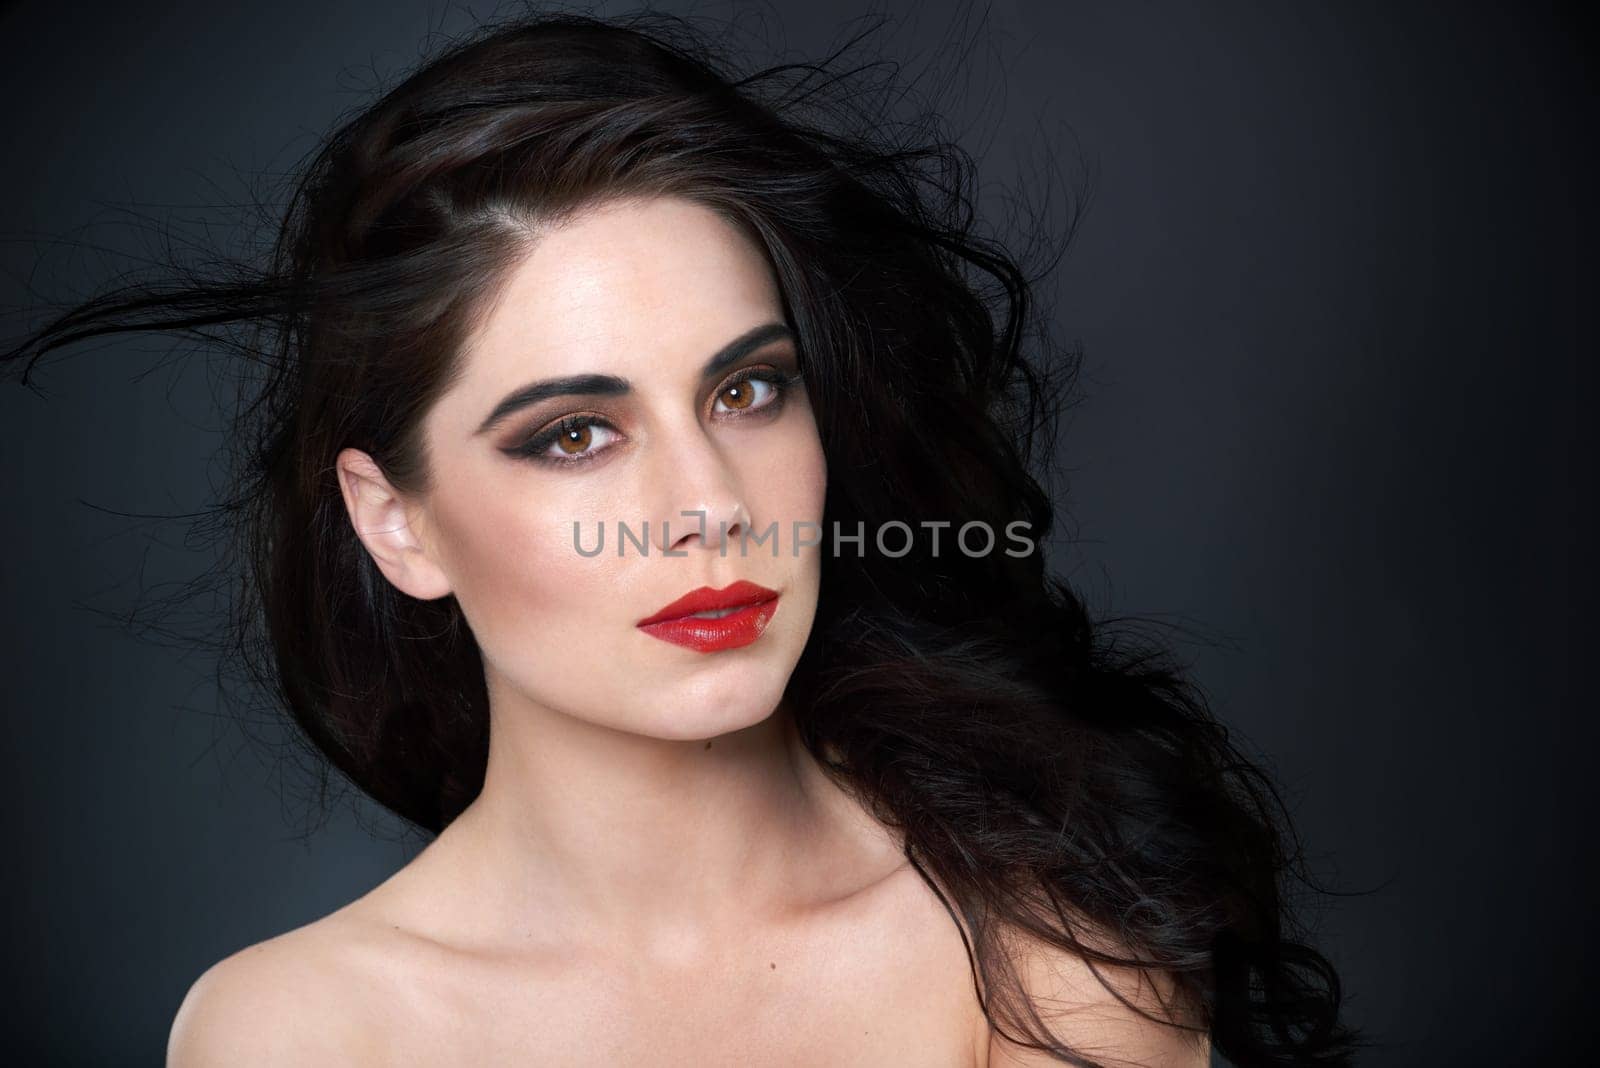 Beauty, makeup and portrait of woman in studio for skincare, wellness and glamour. Cosmetology, aesthetic and face of confident person with red lipstick, cosmetics and salon care on black background.